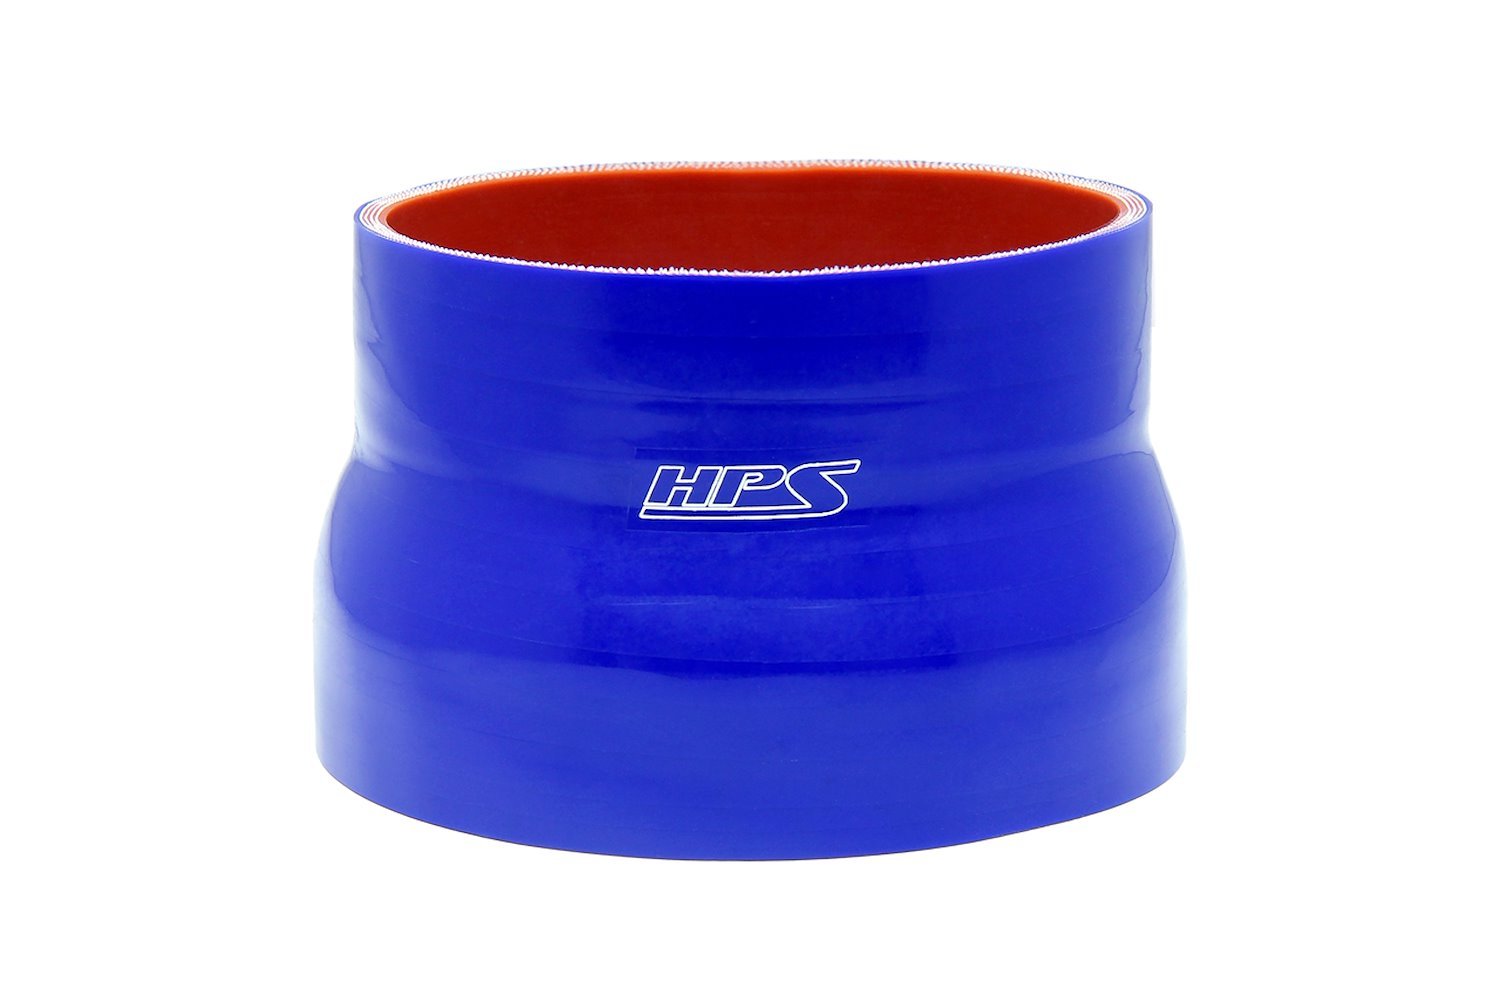 HTSR-350-425-L5-BLUE Silicone Reducer Hose, High-Temp 4-Ply Reinforced, 3-1/2 in. - 4-1/4 in. ID, 5 in. Long, Blue